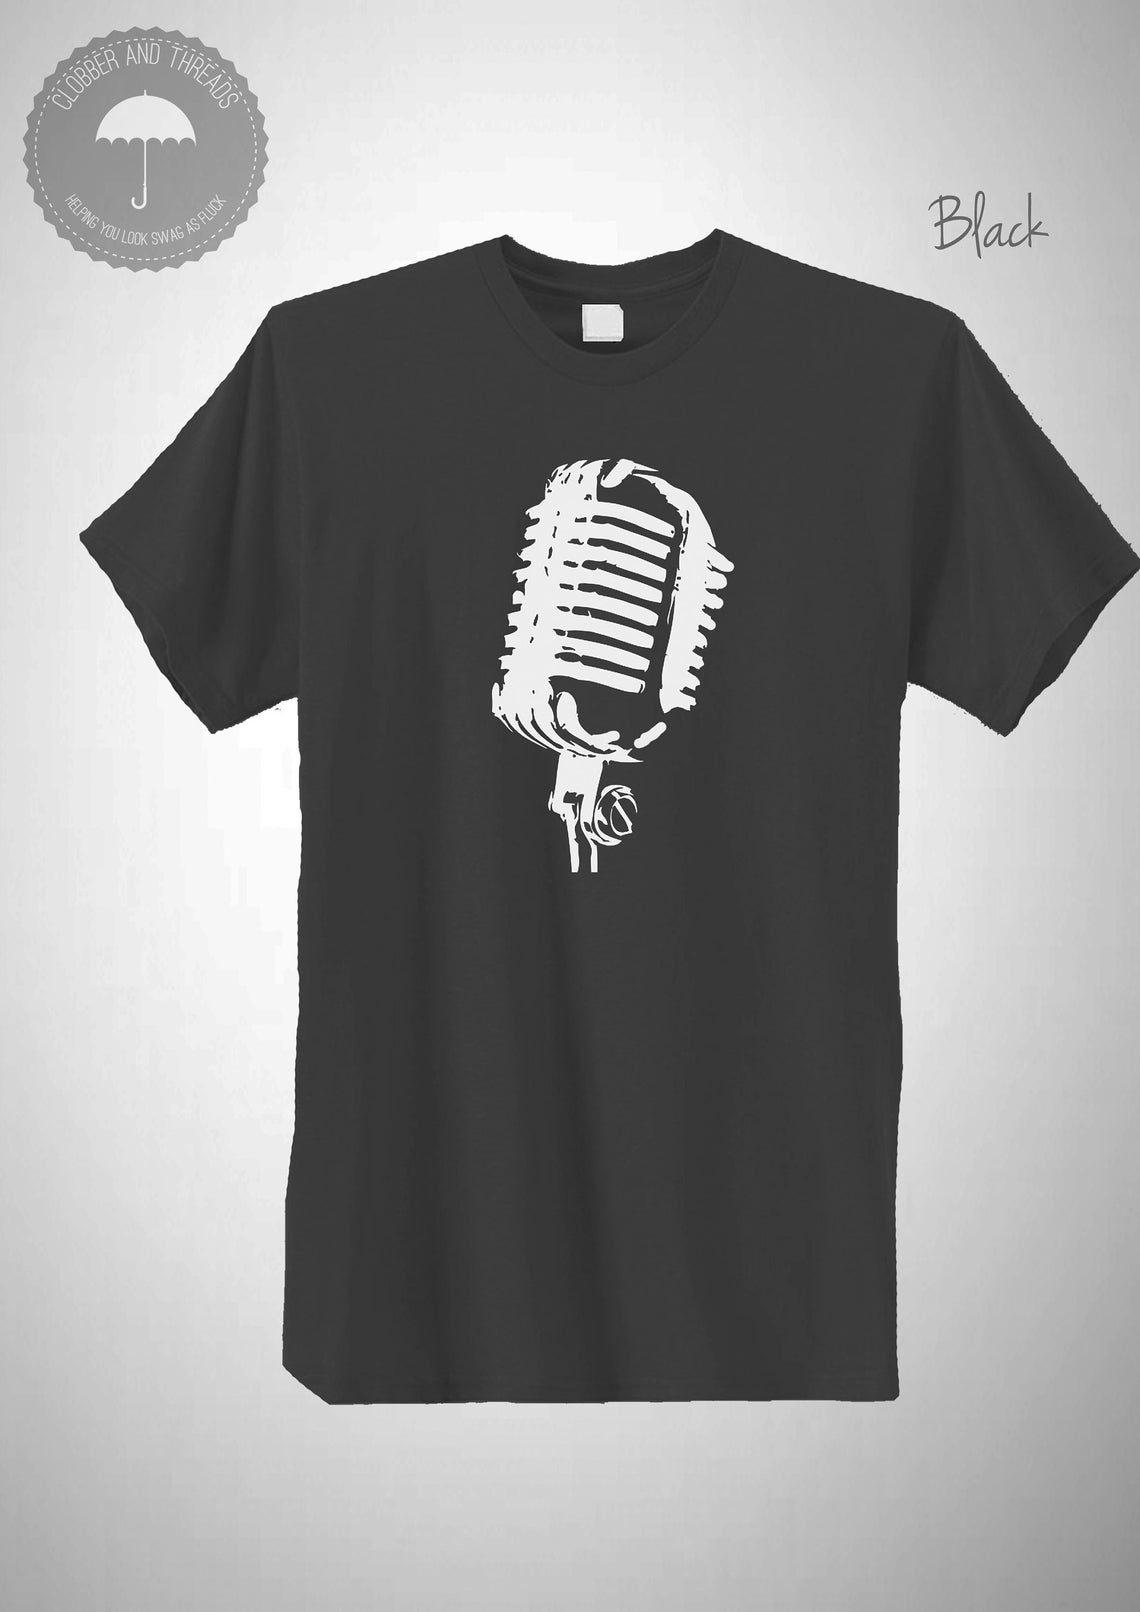 Microphone Scribble T-Shirt Music Band Singer Voice Tshirt Top | Etsy